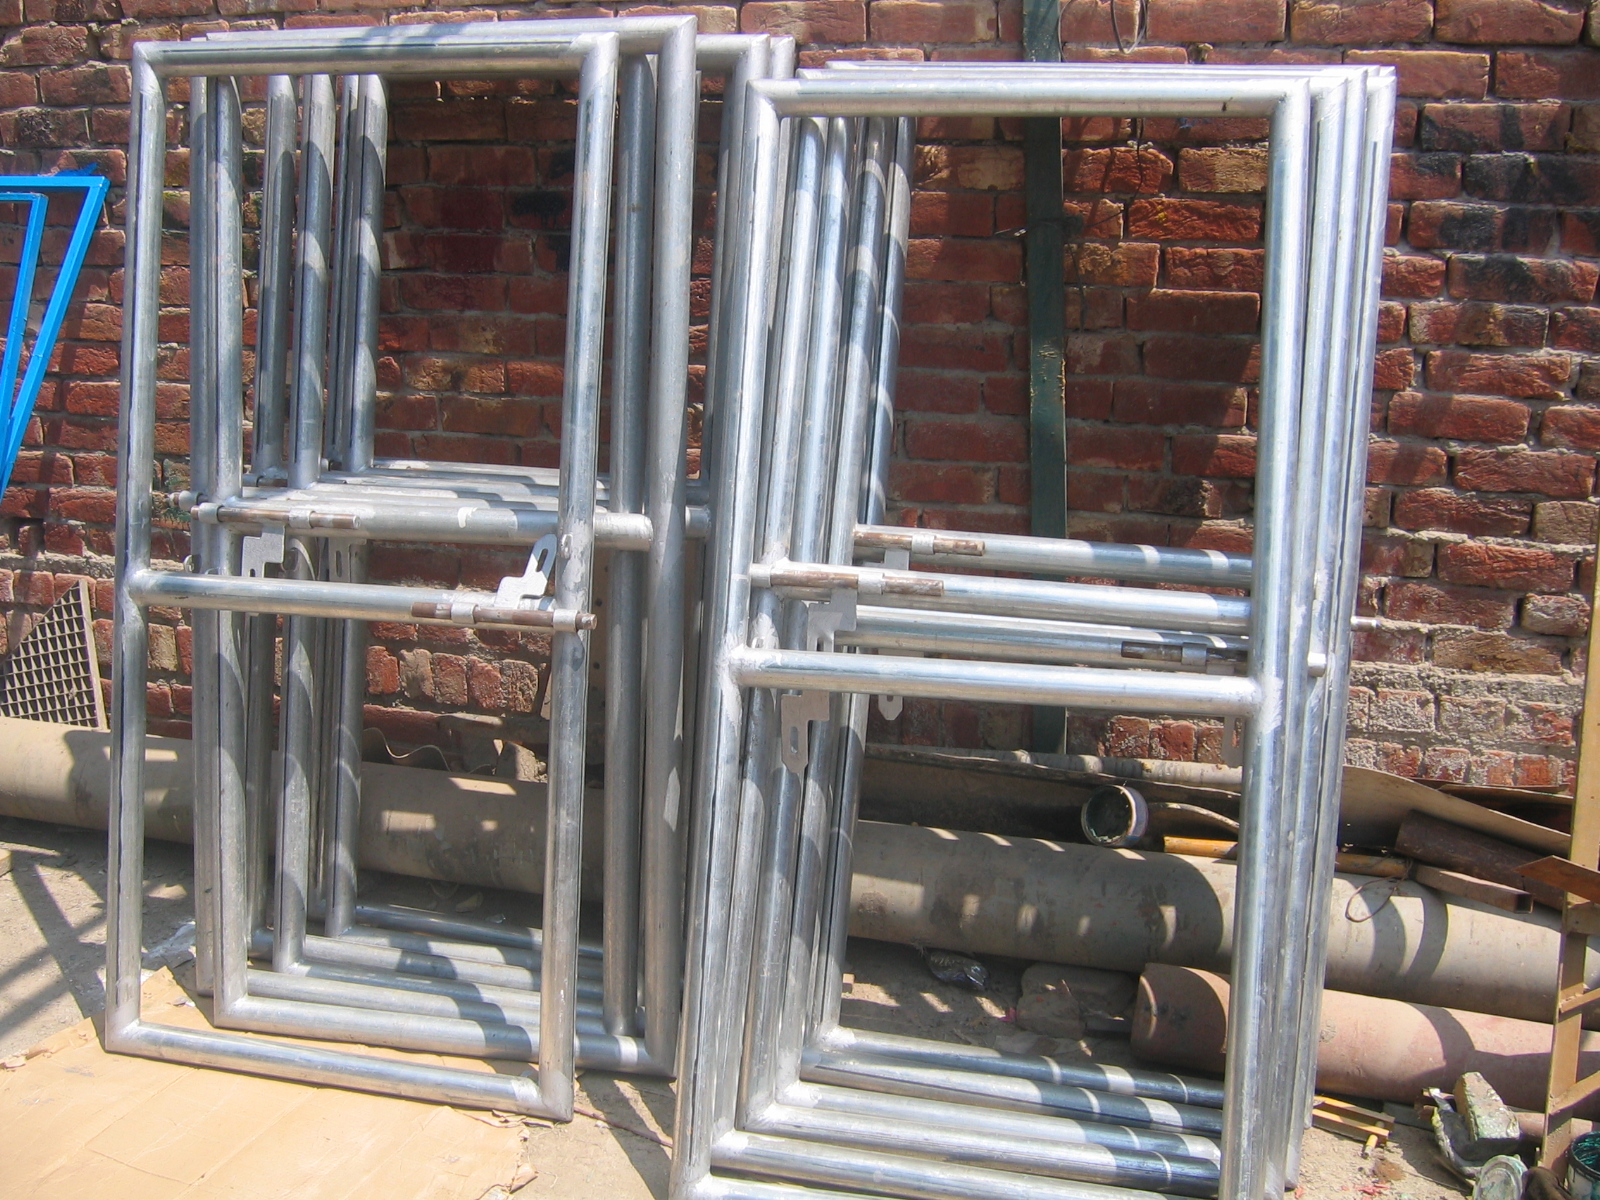 Fence_Fence-columns_chain-link-wire-mesh-fence_wire-mesh-fence_fence-doors